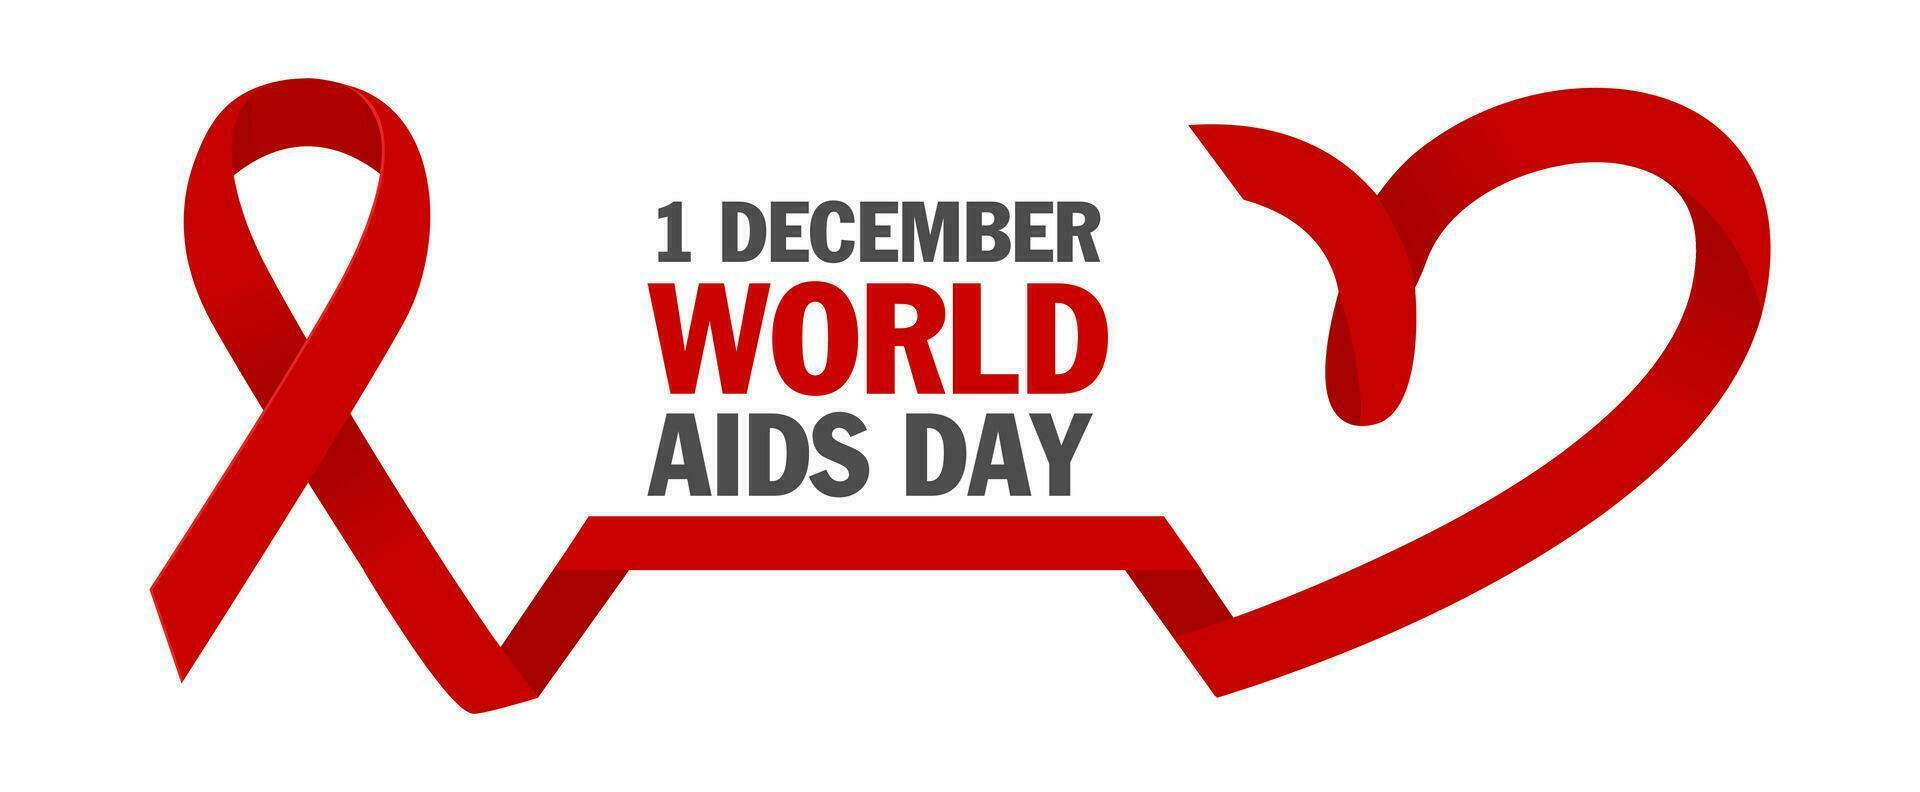 HIV test. World AIDS Day 1 December, red ribbon. vector